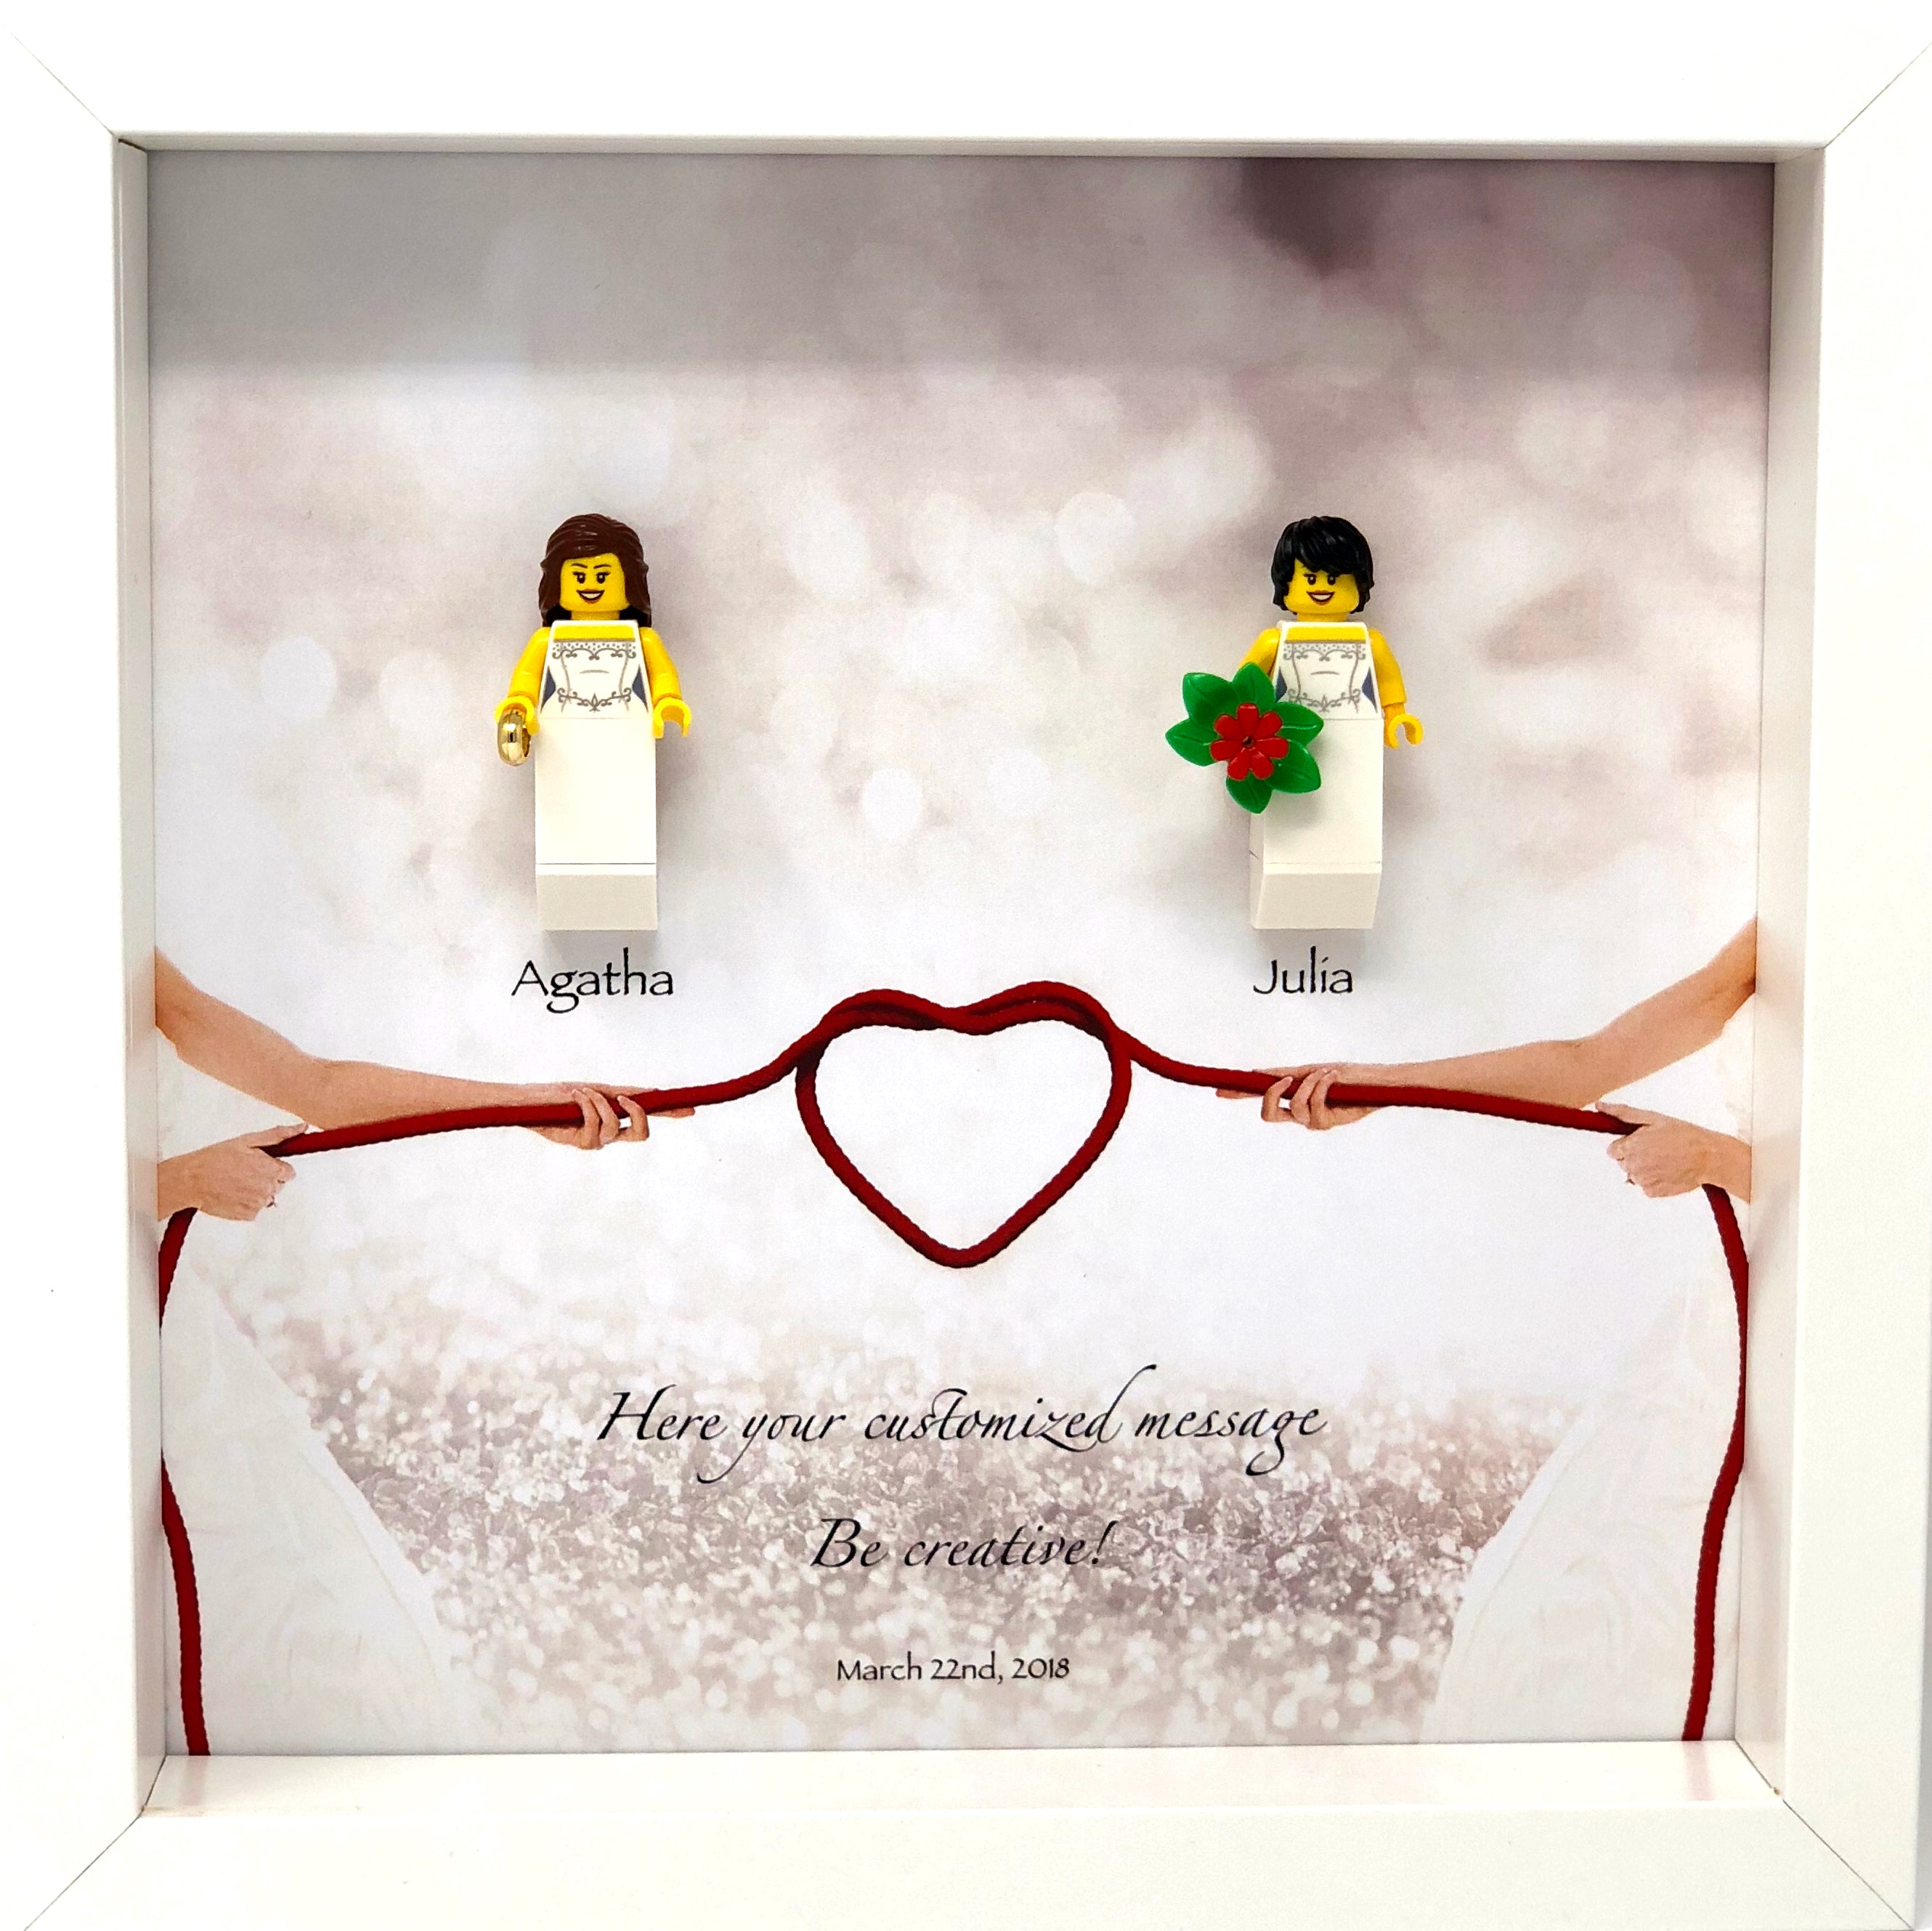 Oil painting photo frame |wedding gift|Birthday gift| Anniversary gift|  (12x8inch) : Amazon.in: Home & Kitchen